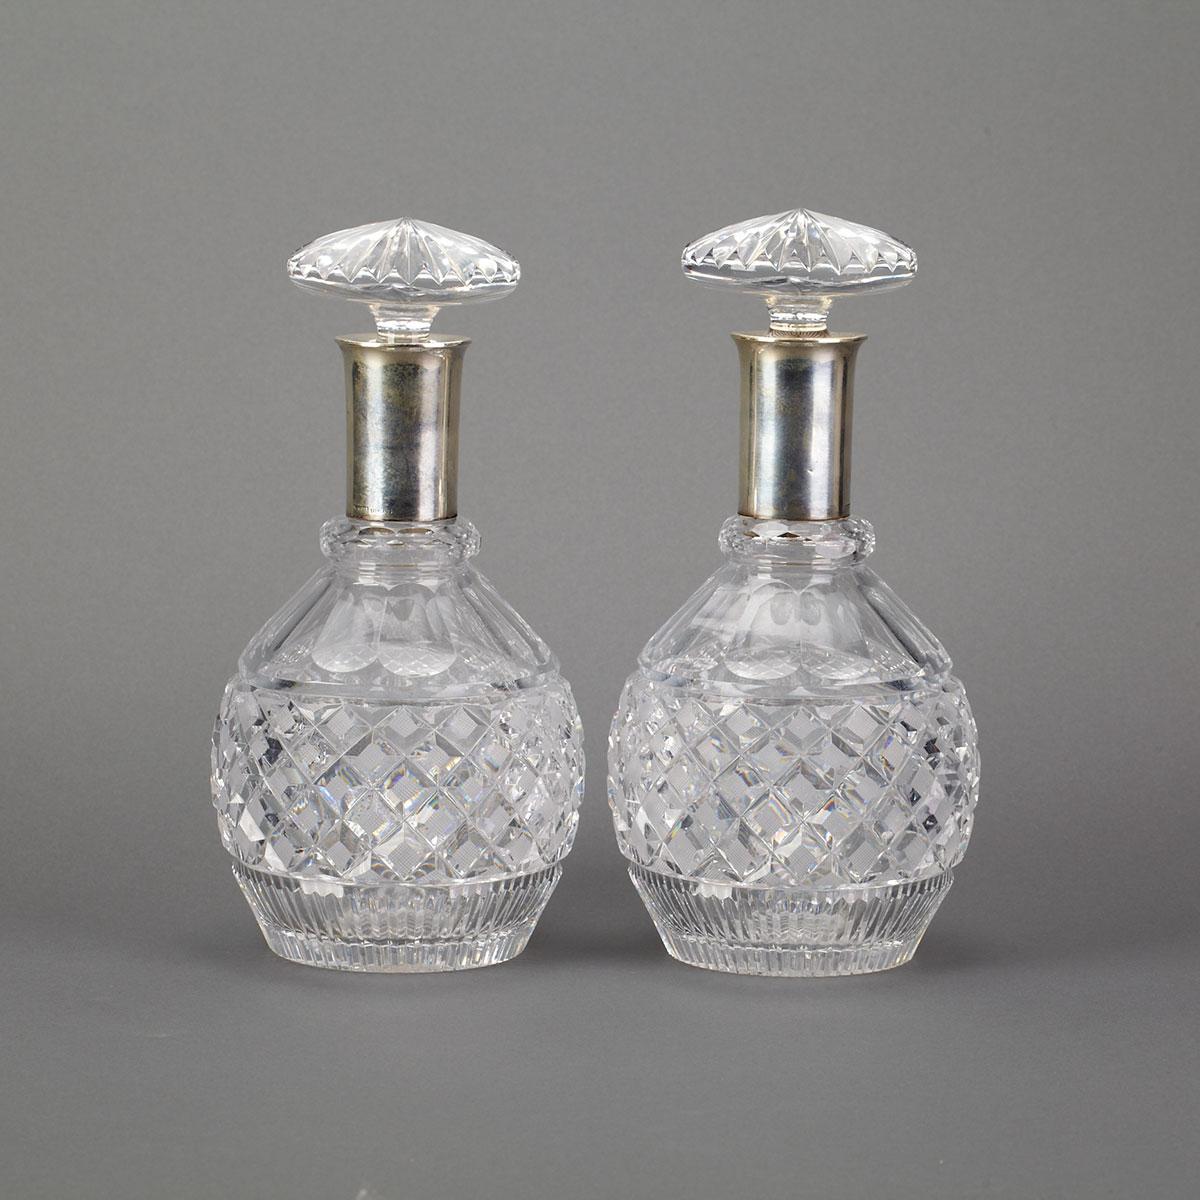 Pair of Silver Mounted Cut Glass Decanters with Stoppers, early 20th century